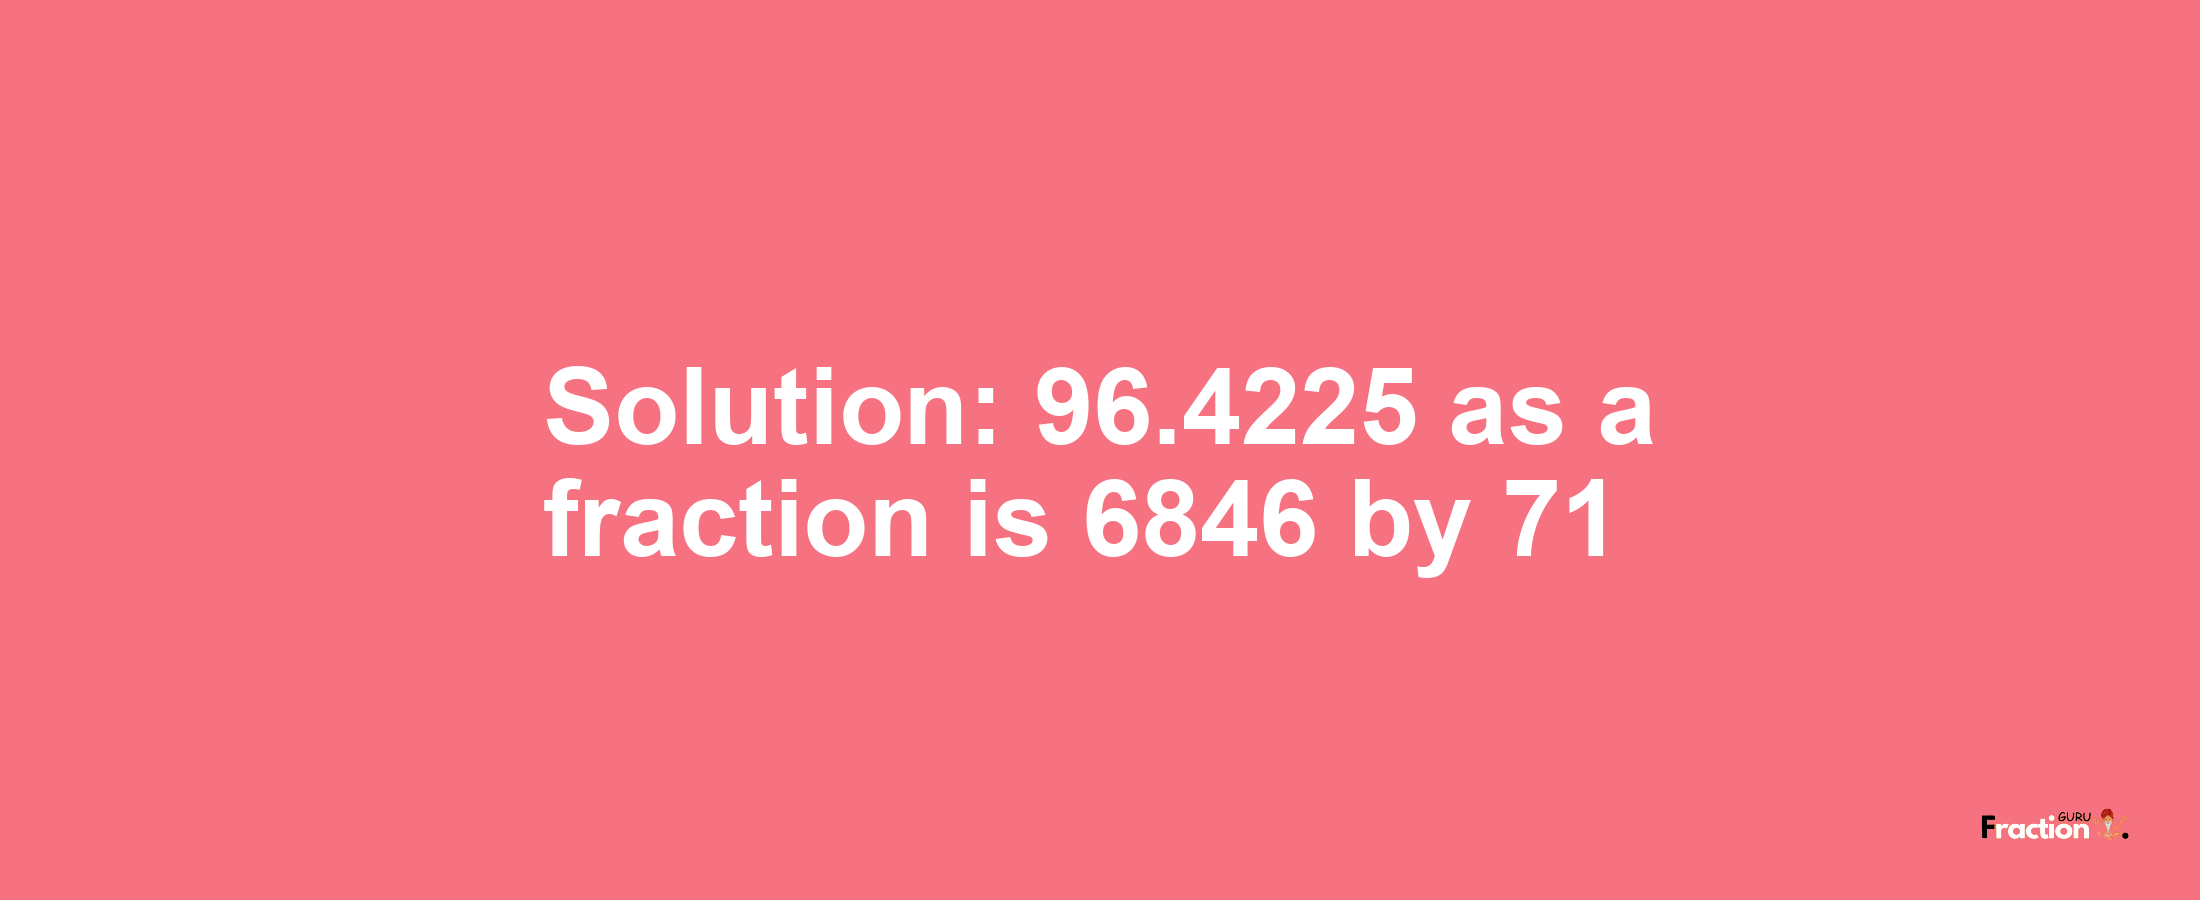 Solution:96.4225 as a fraction is 6846/71